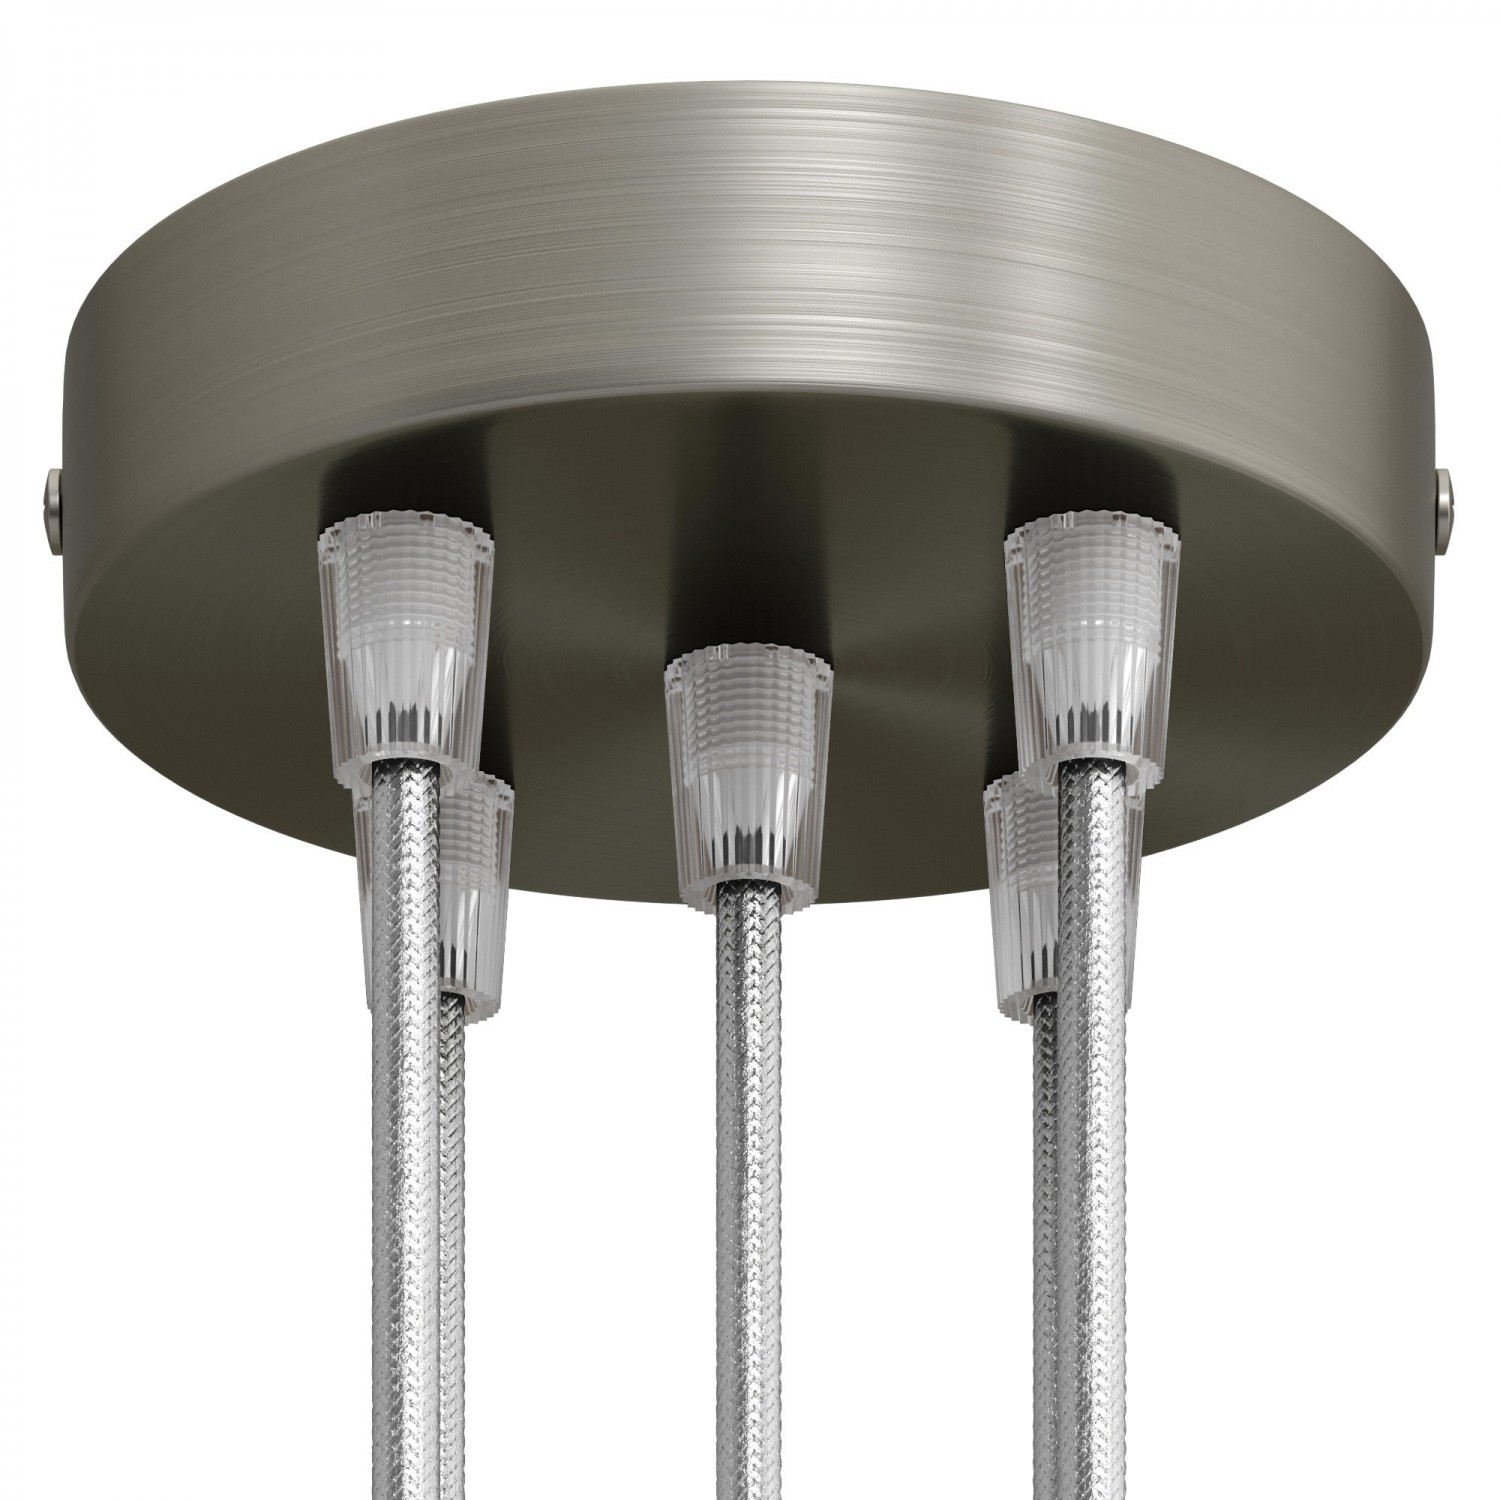 Cylindrical metal 5-hole ceiling rose kit